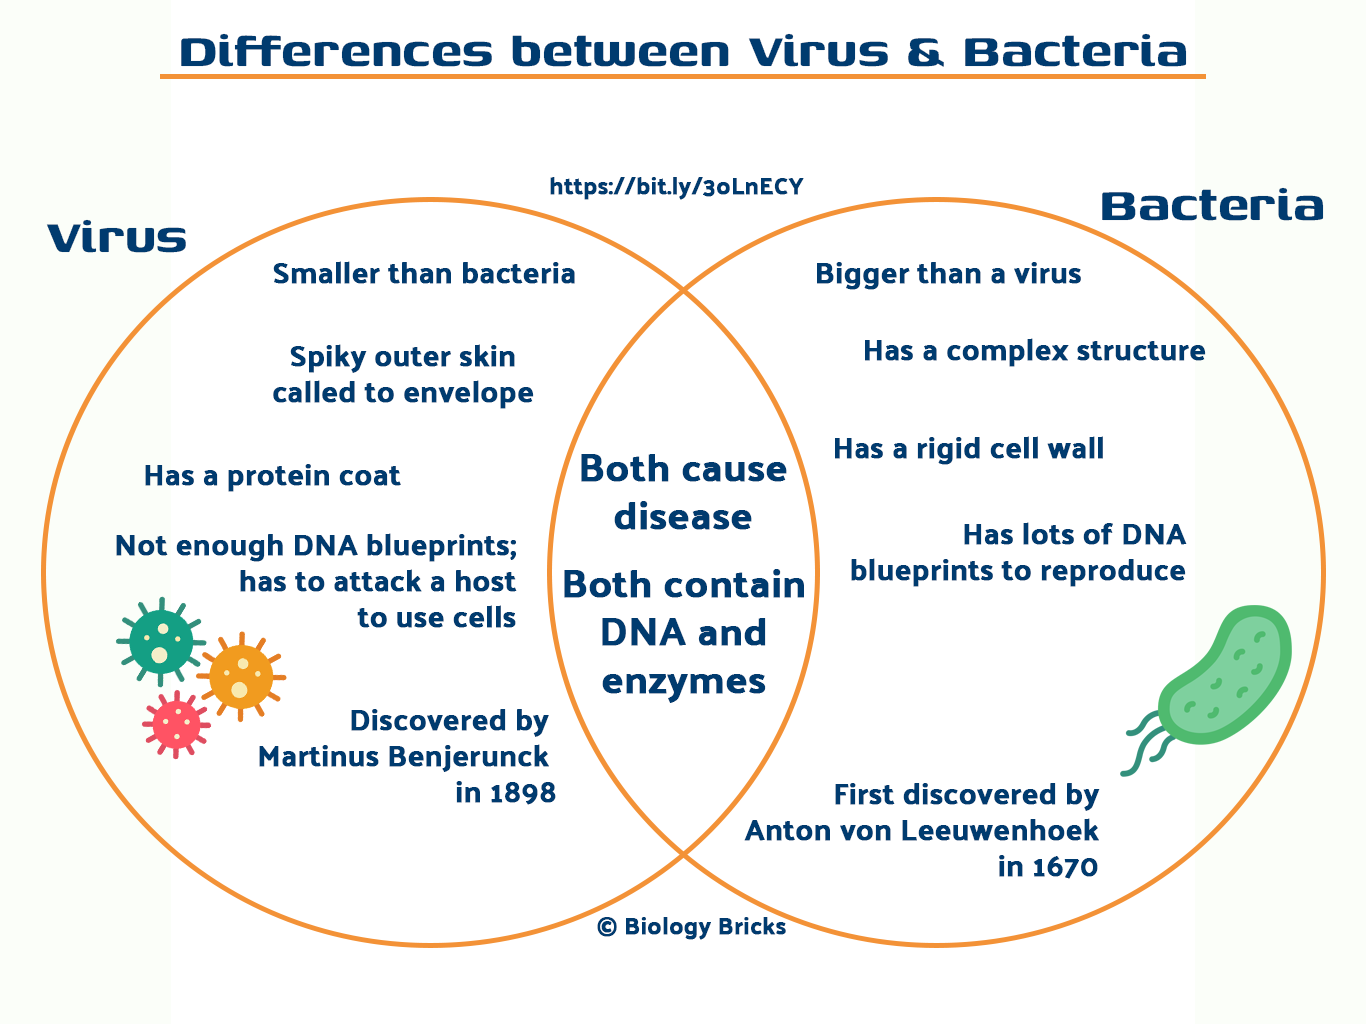 Bacteria Vs Viruses The Fight Off Between Bacteria And Viruses Showing The Main Differences 